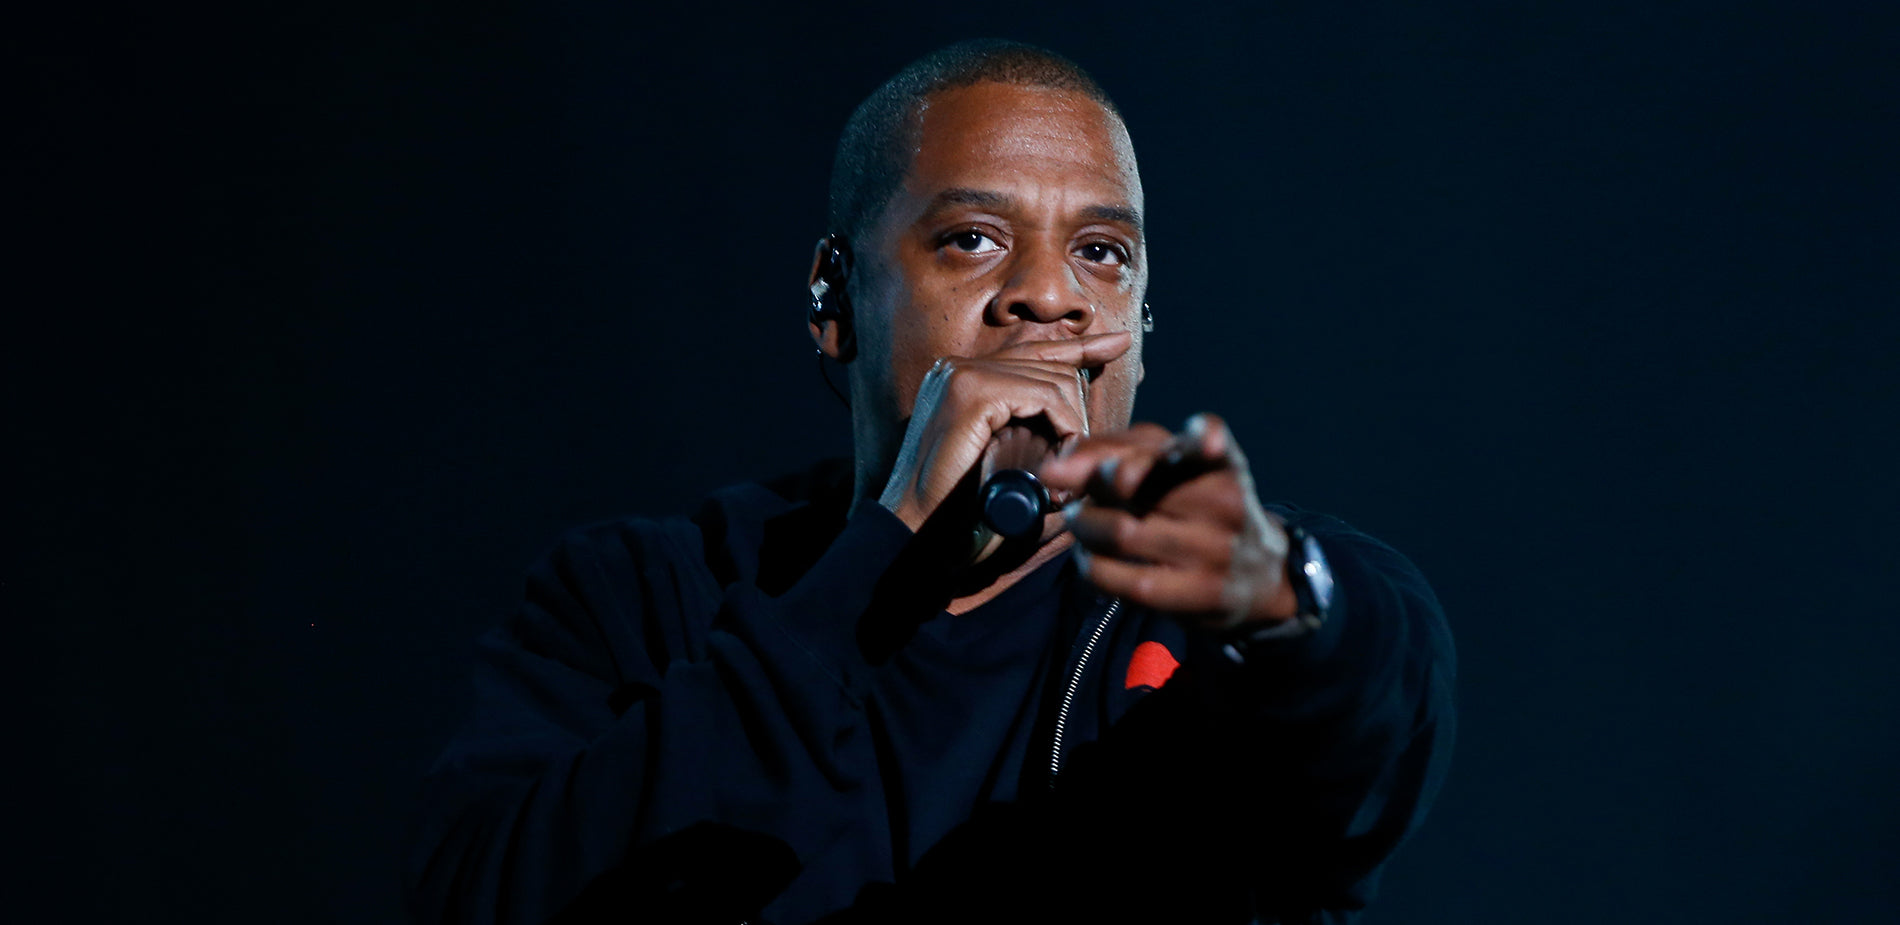 7 JAY Z WORKOUT SONGS TO TAKE YOUR SESSION TO THE NEXT LEVEL